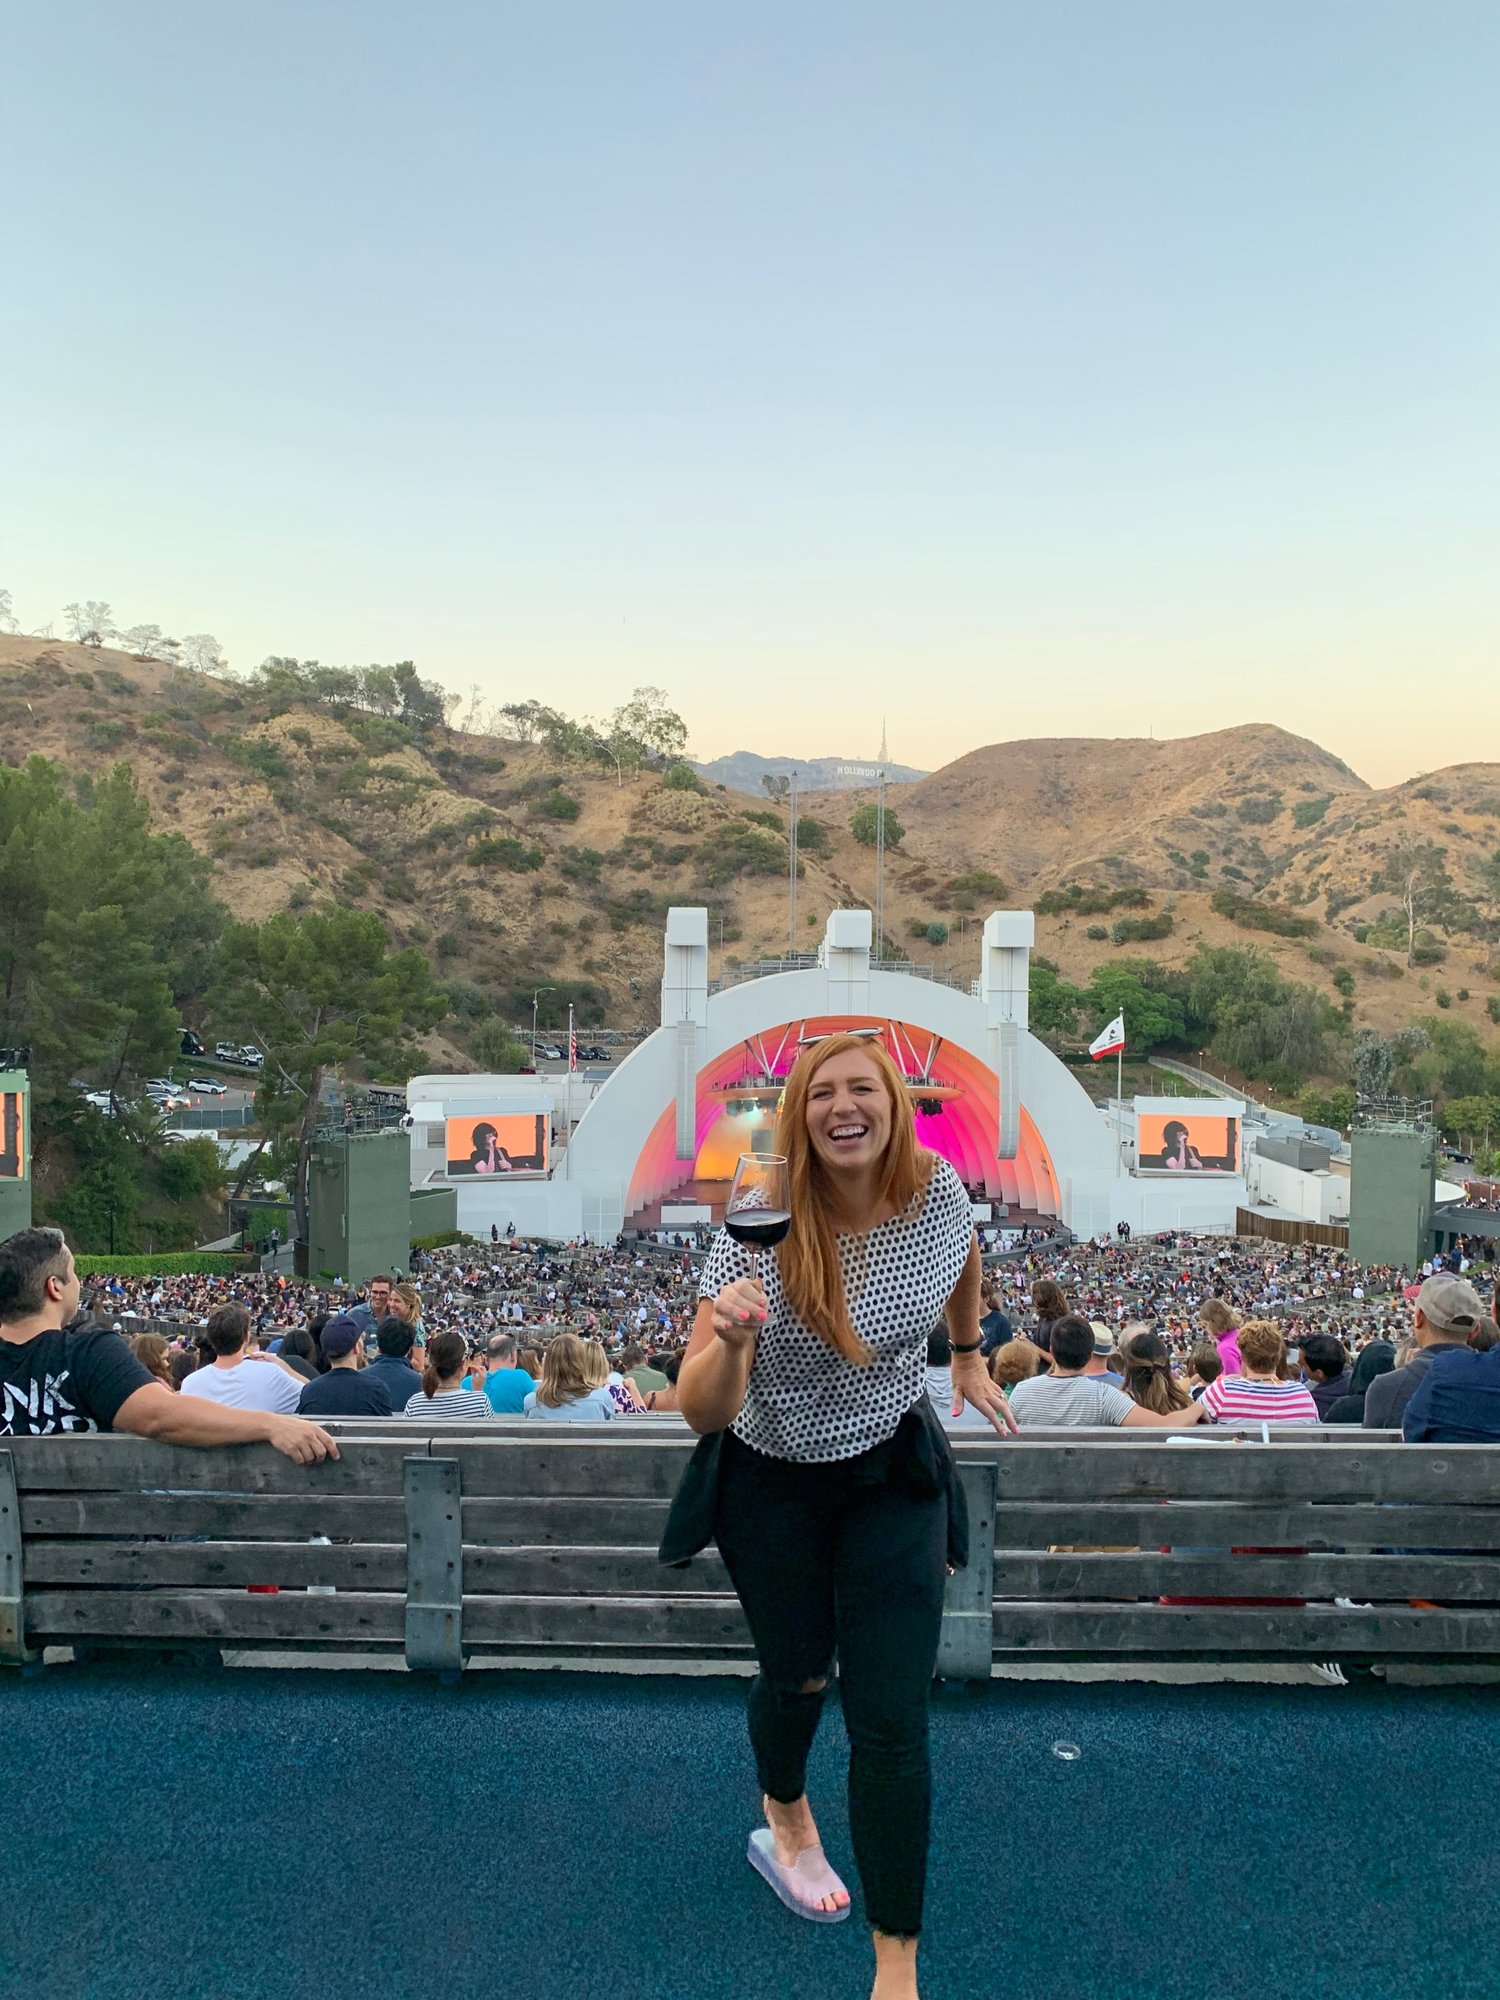 Peep the Hollywood sign above the stage!